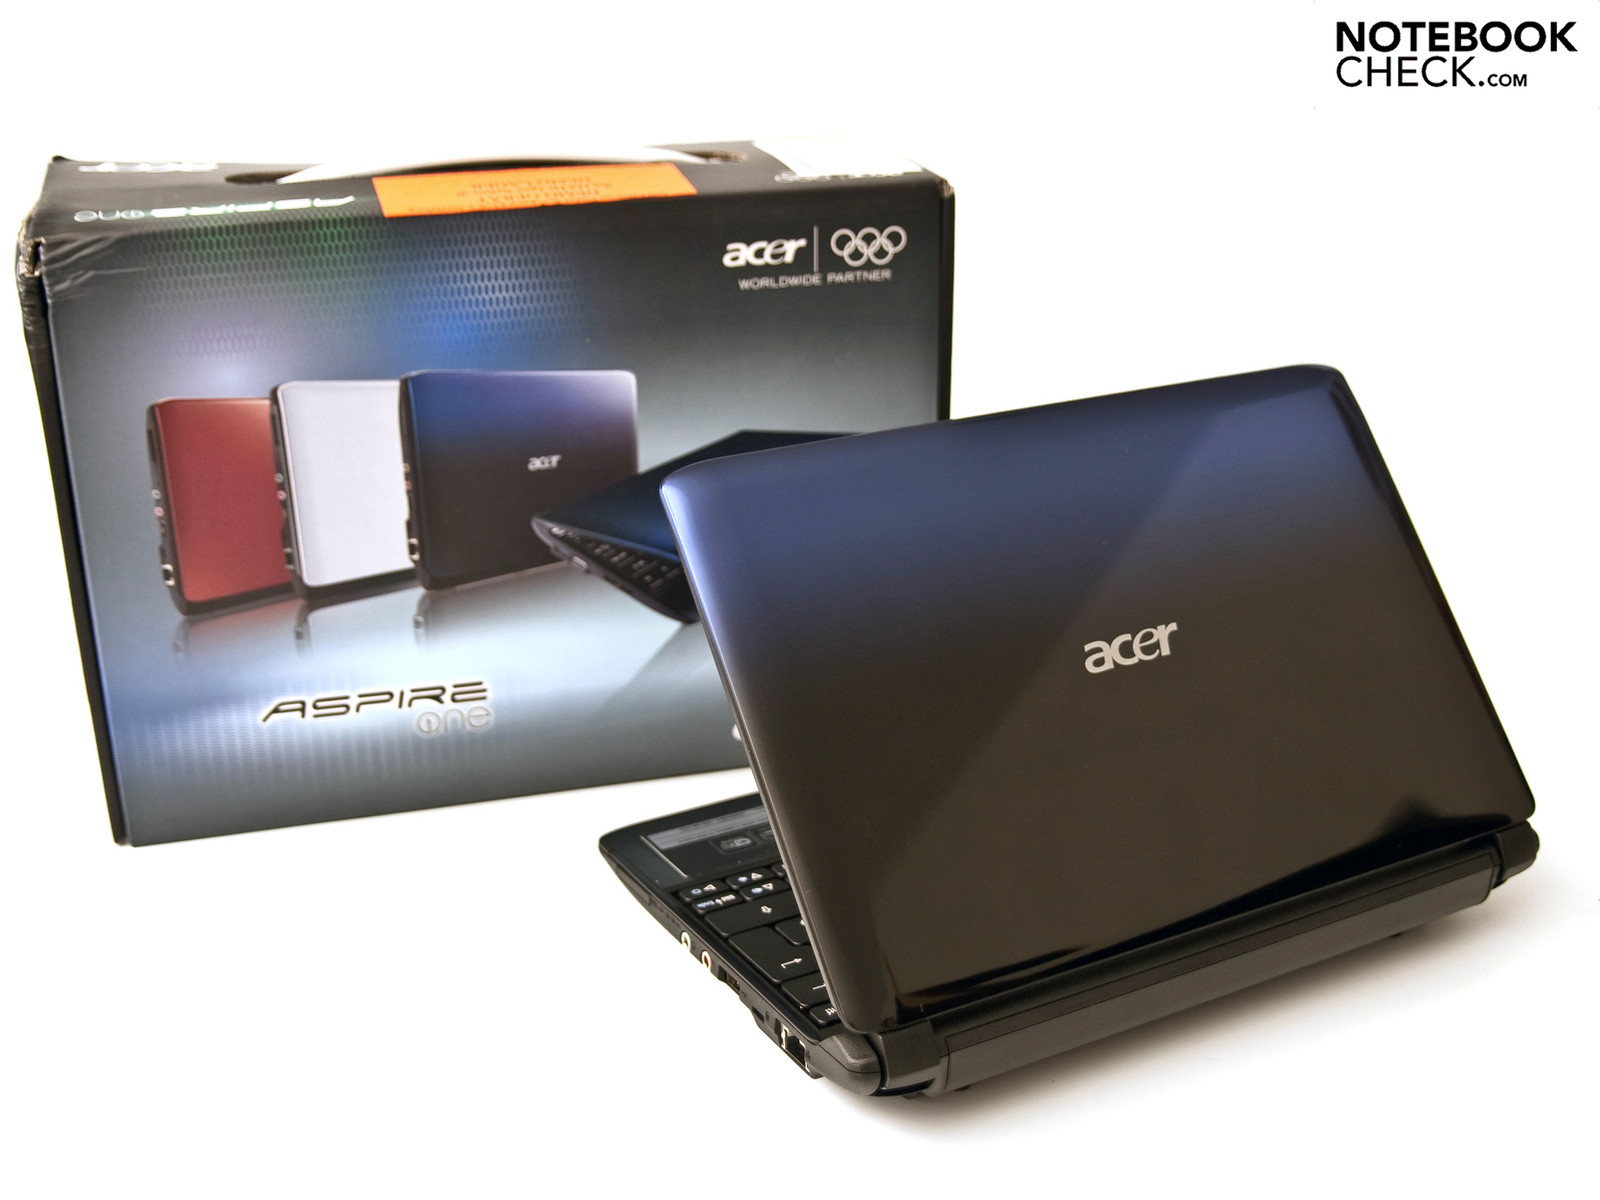 acer aspire one recovery disc download windows 7 starter